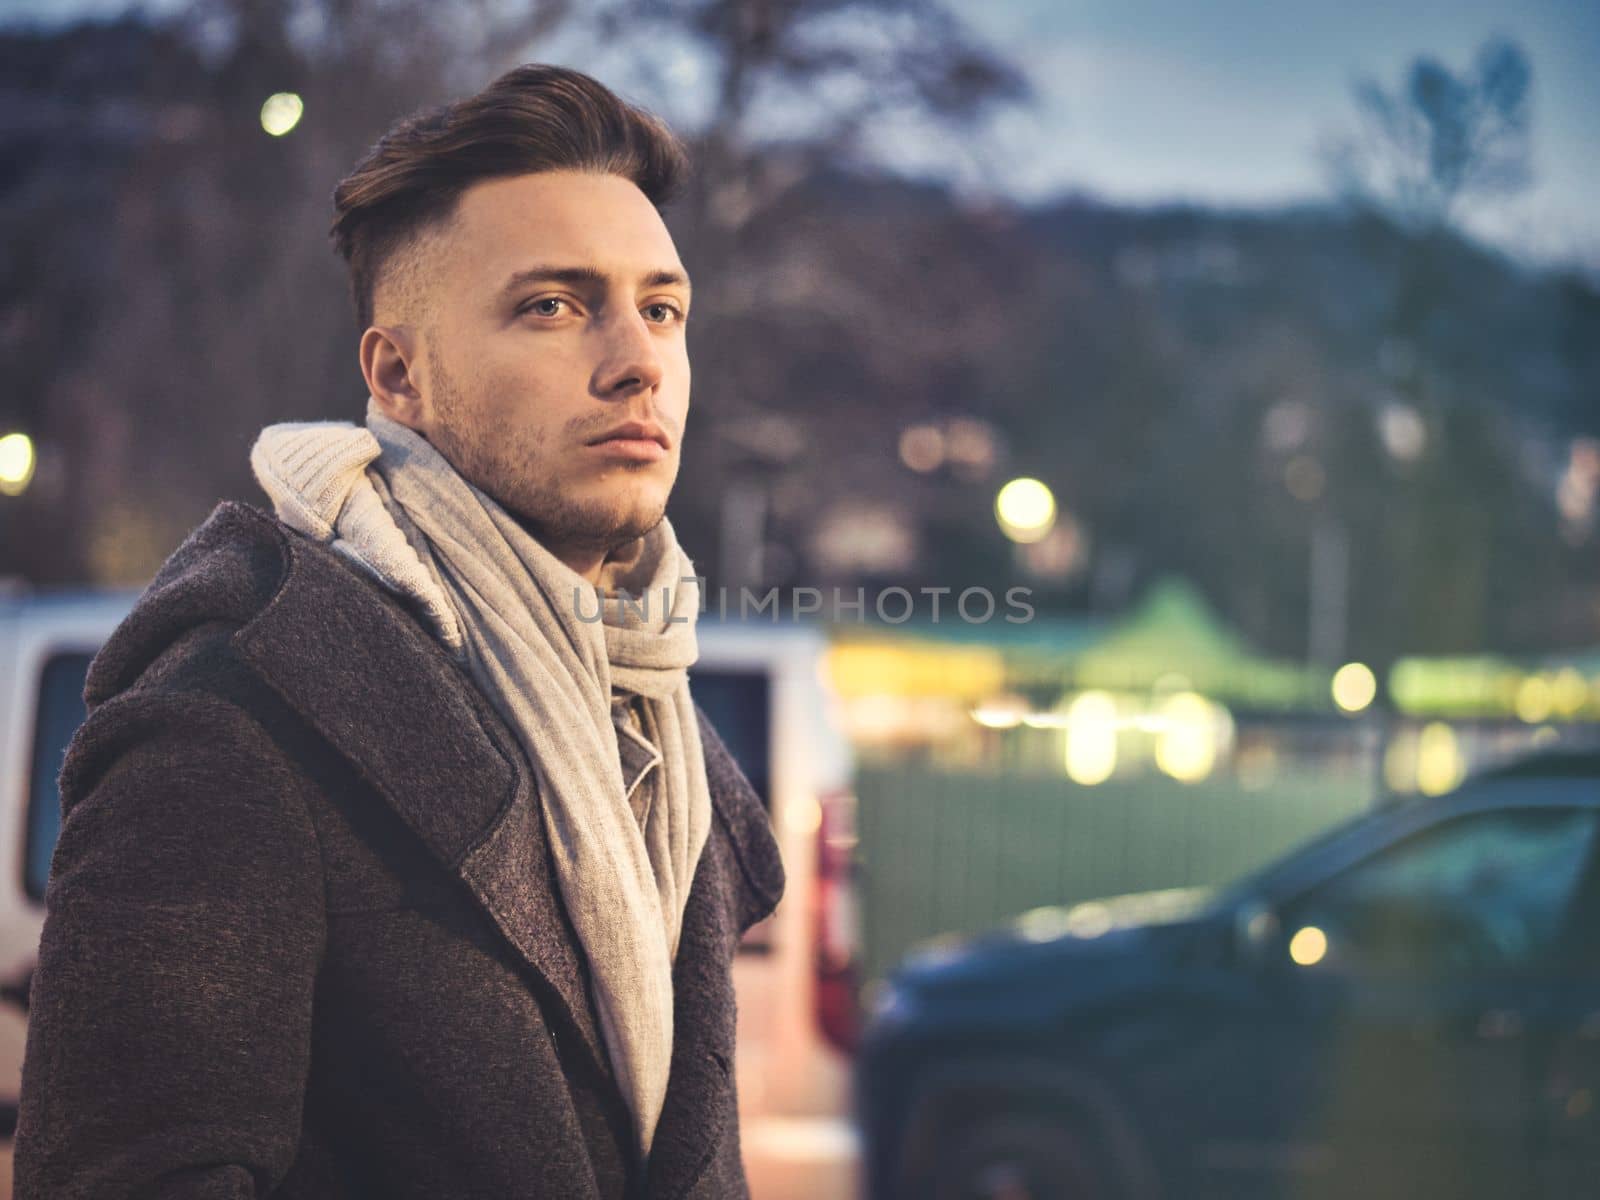 Handsome trendy young man, standing on a sidewalk in city setting at night wearing a fashionable winter coat and scarf, looking at camera